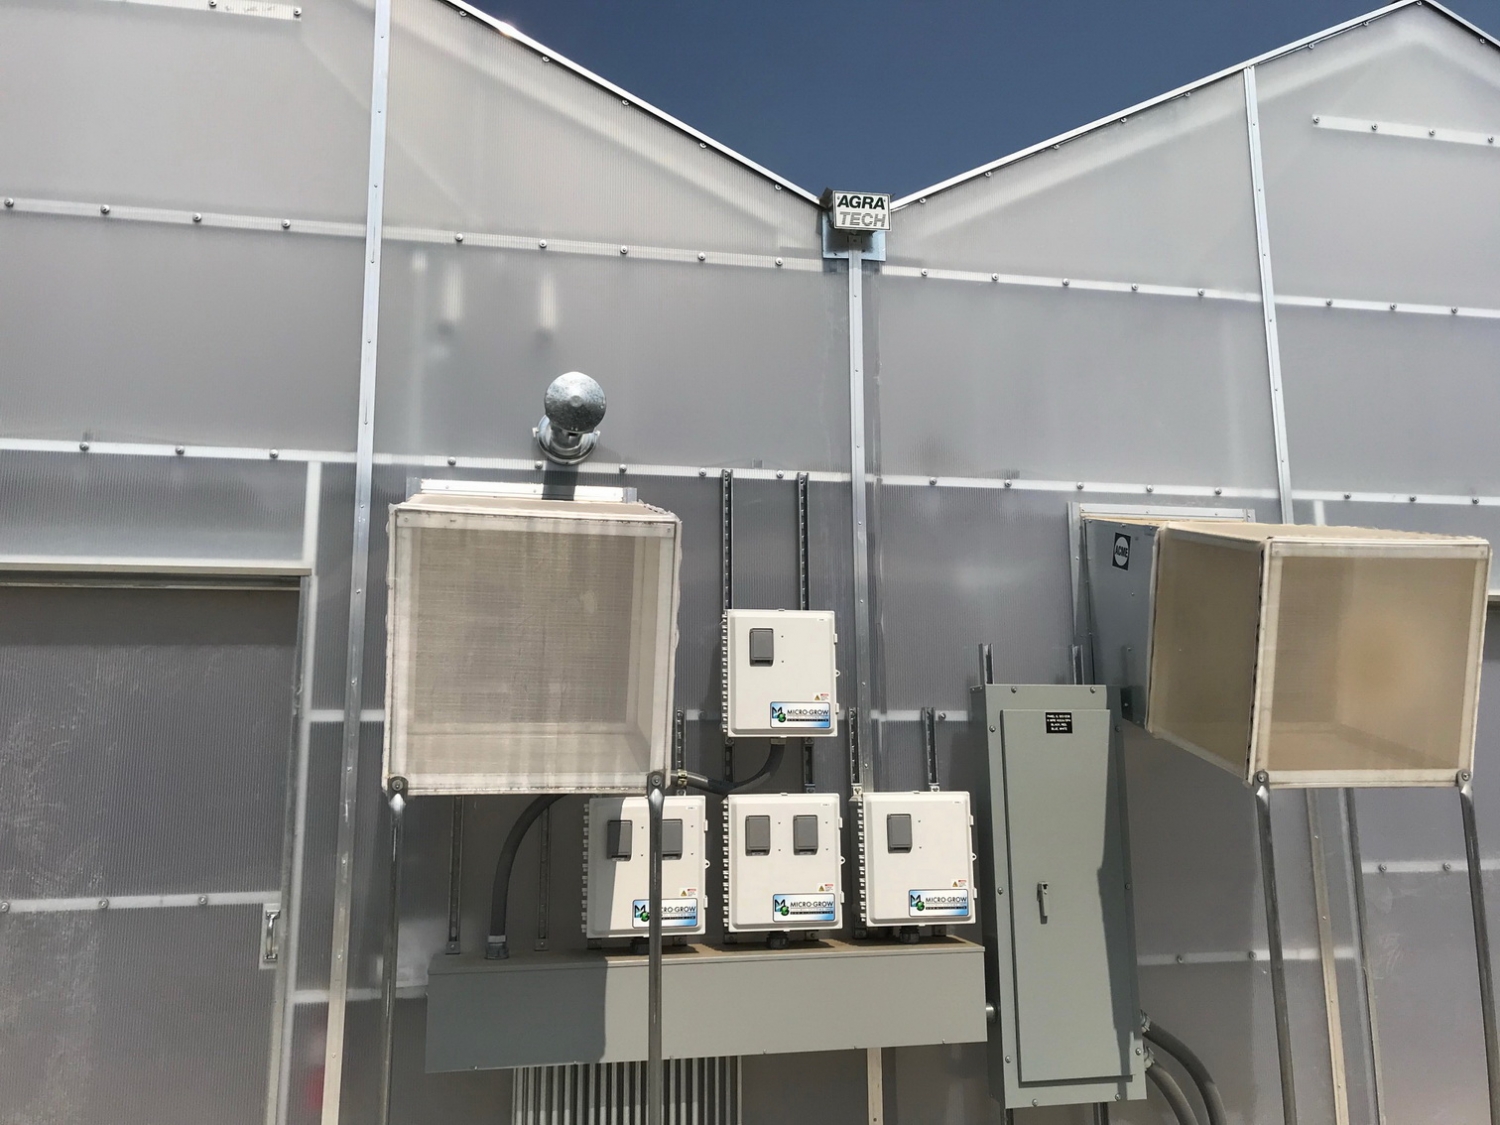 Greenhouse Controls that are necessary to run the new technology